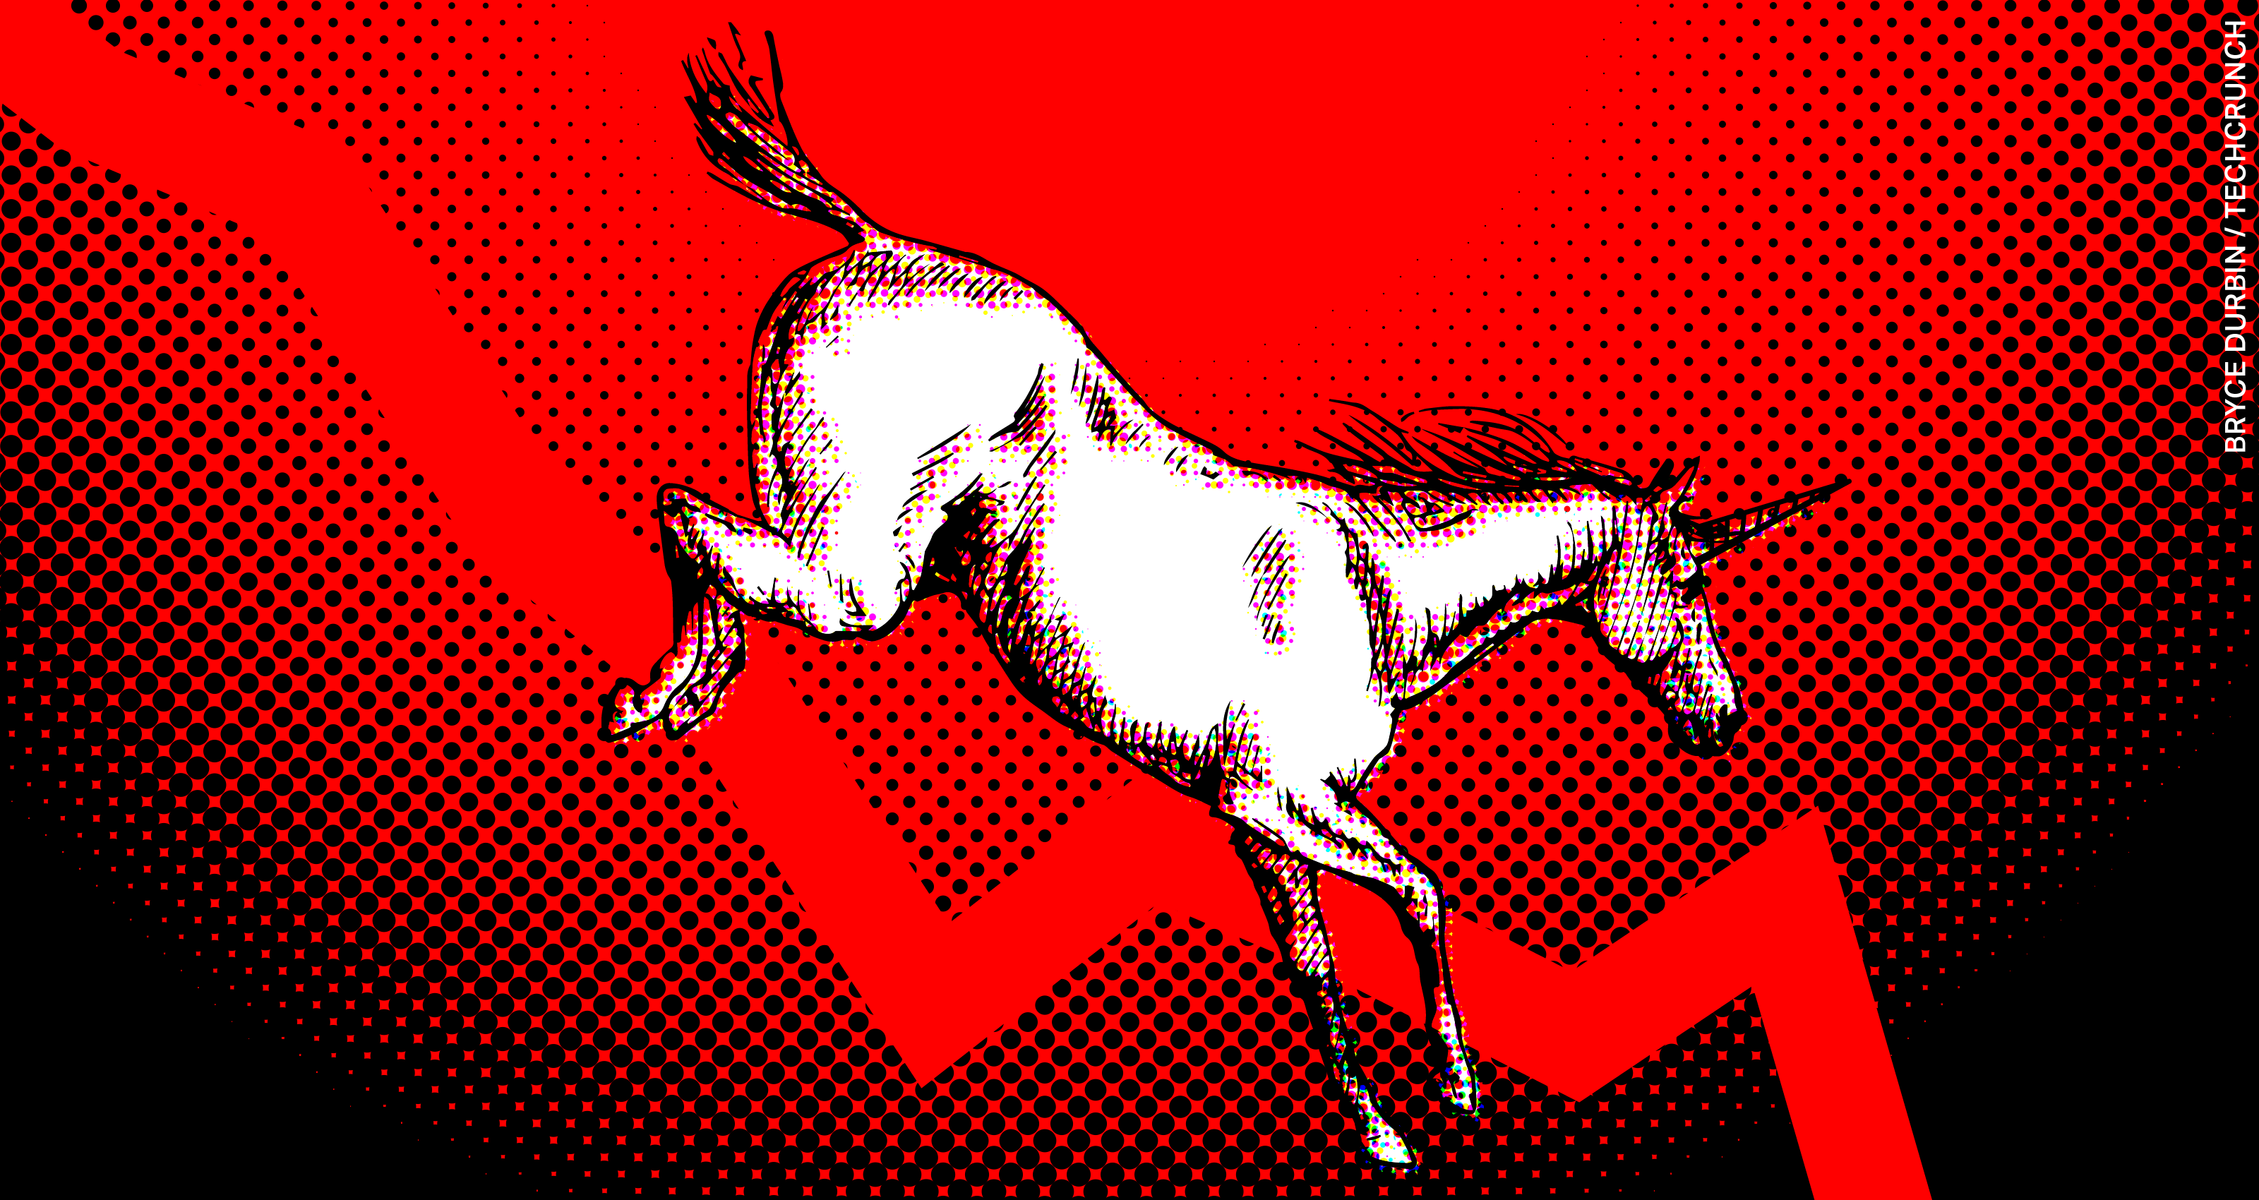 unicorns aren't profitable, and wall street doesn't care | techcrunch